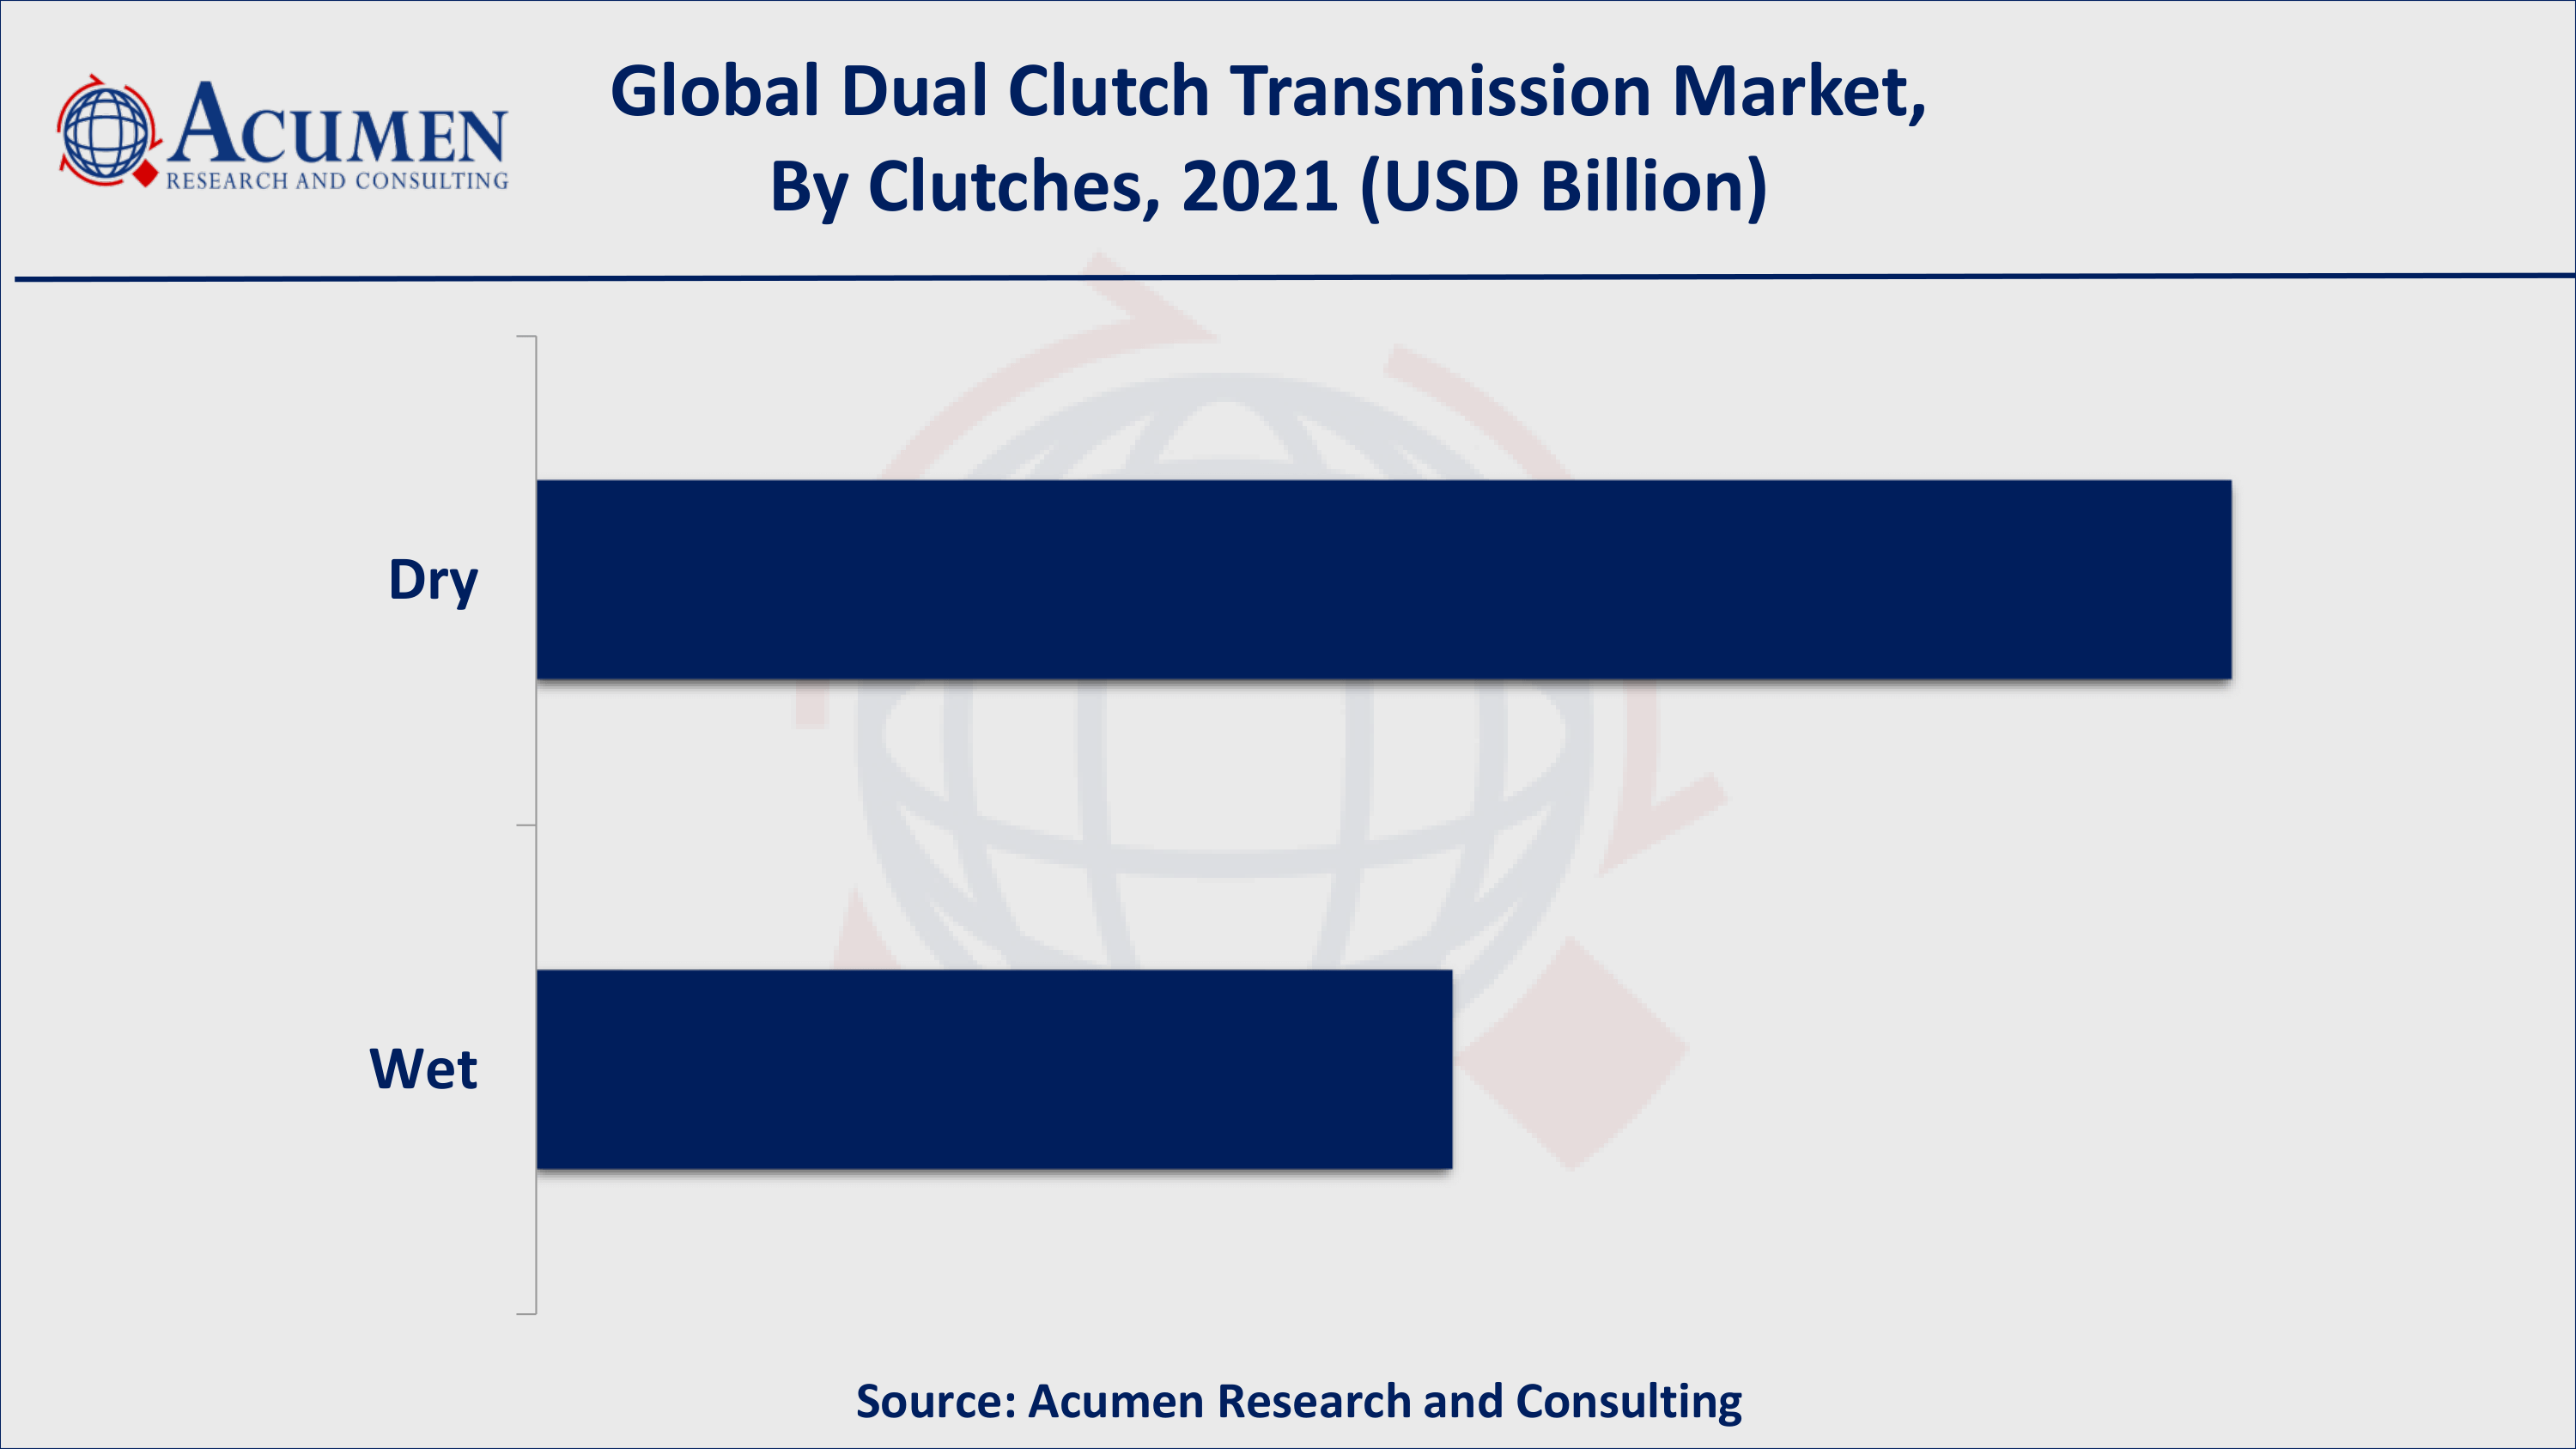 Based on clutches, dry acquired over 65% of the overall market share in 2021